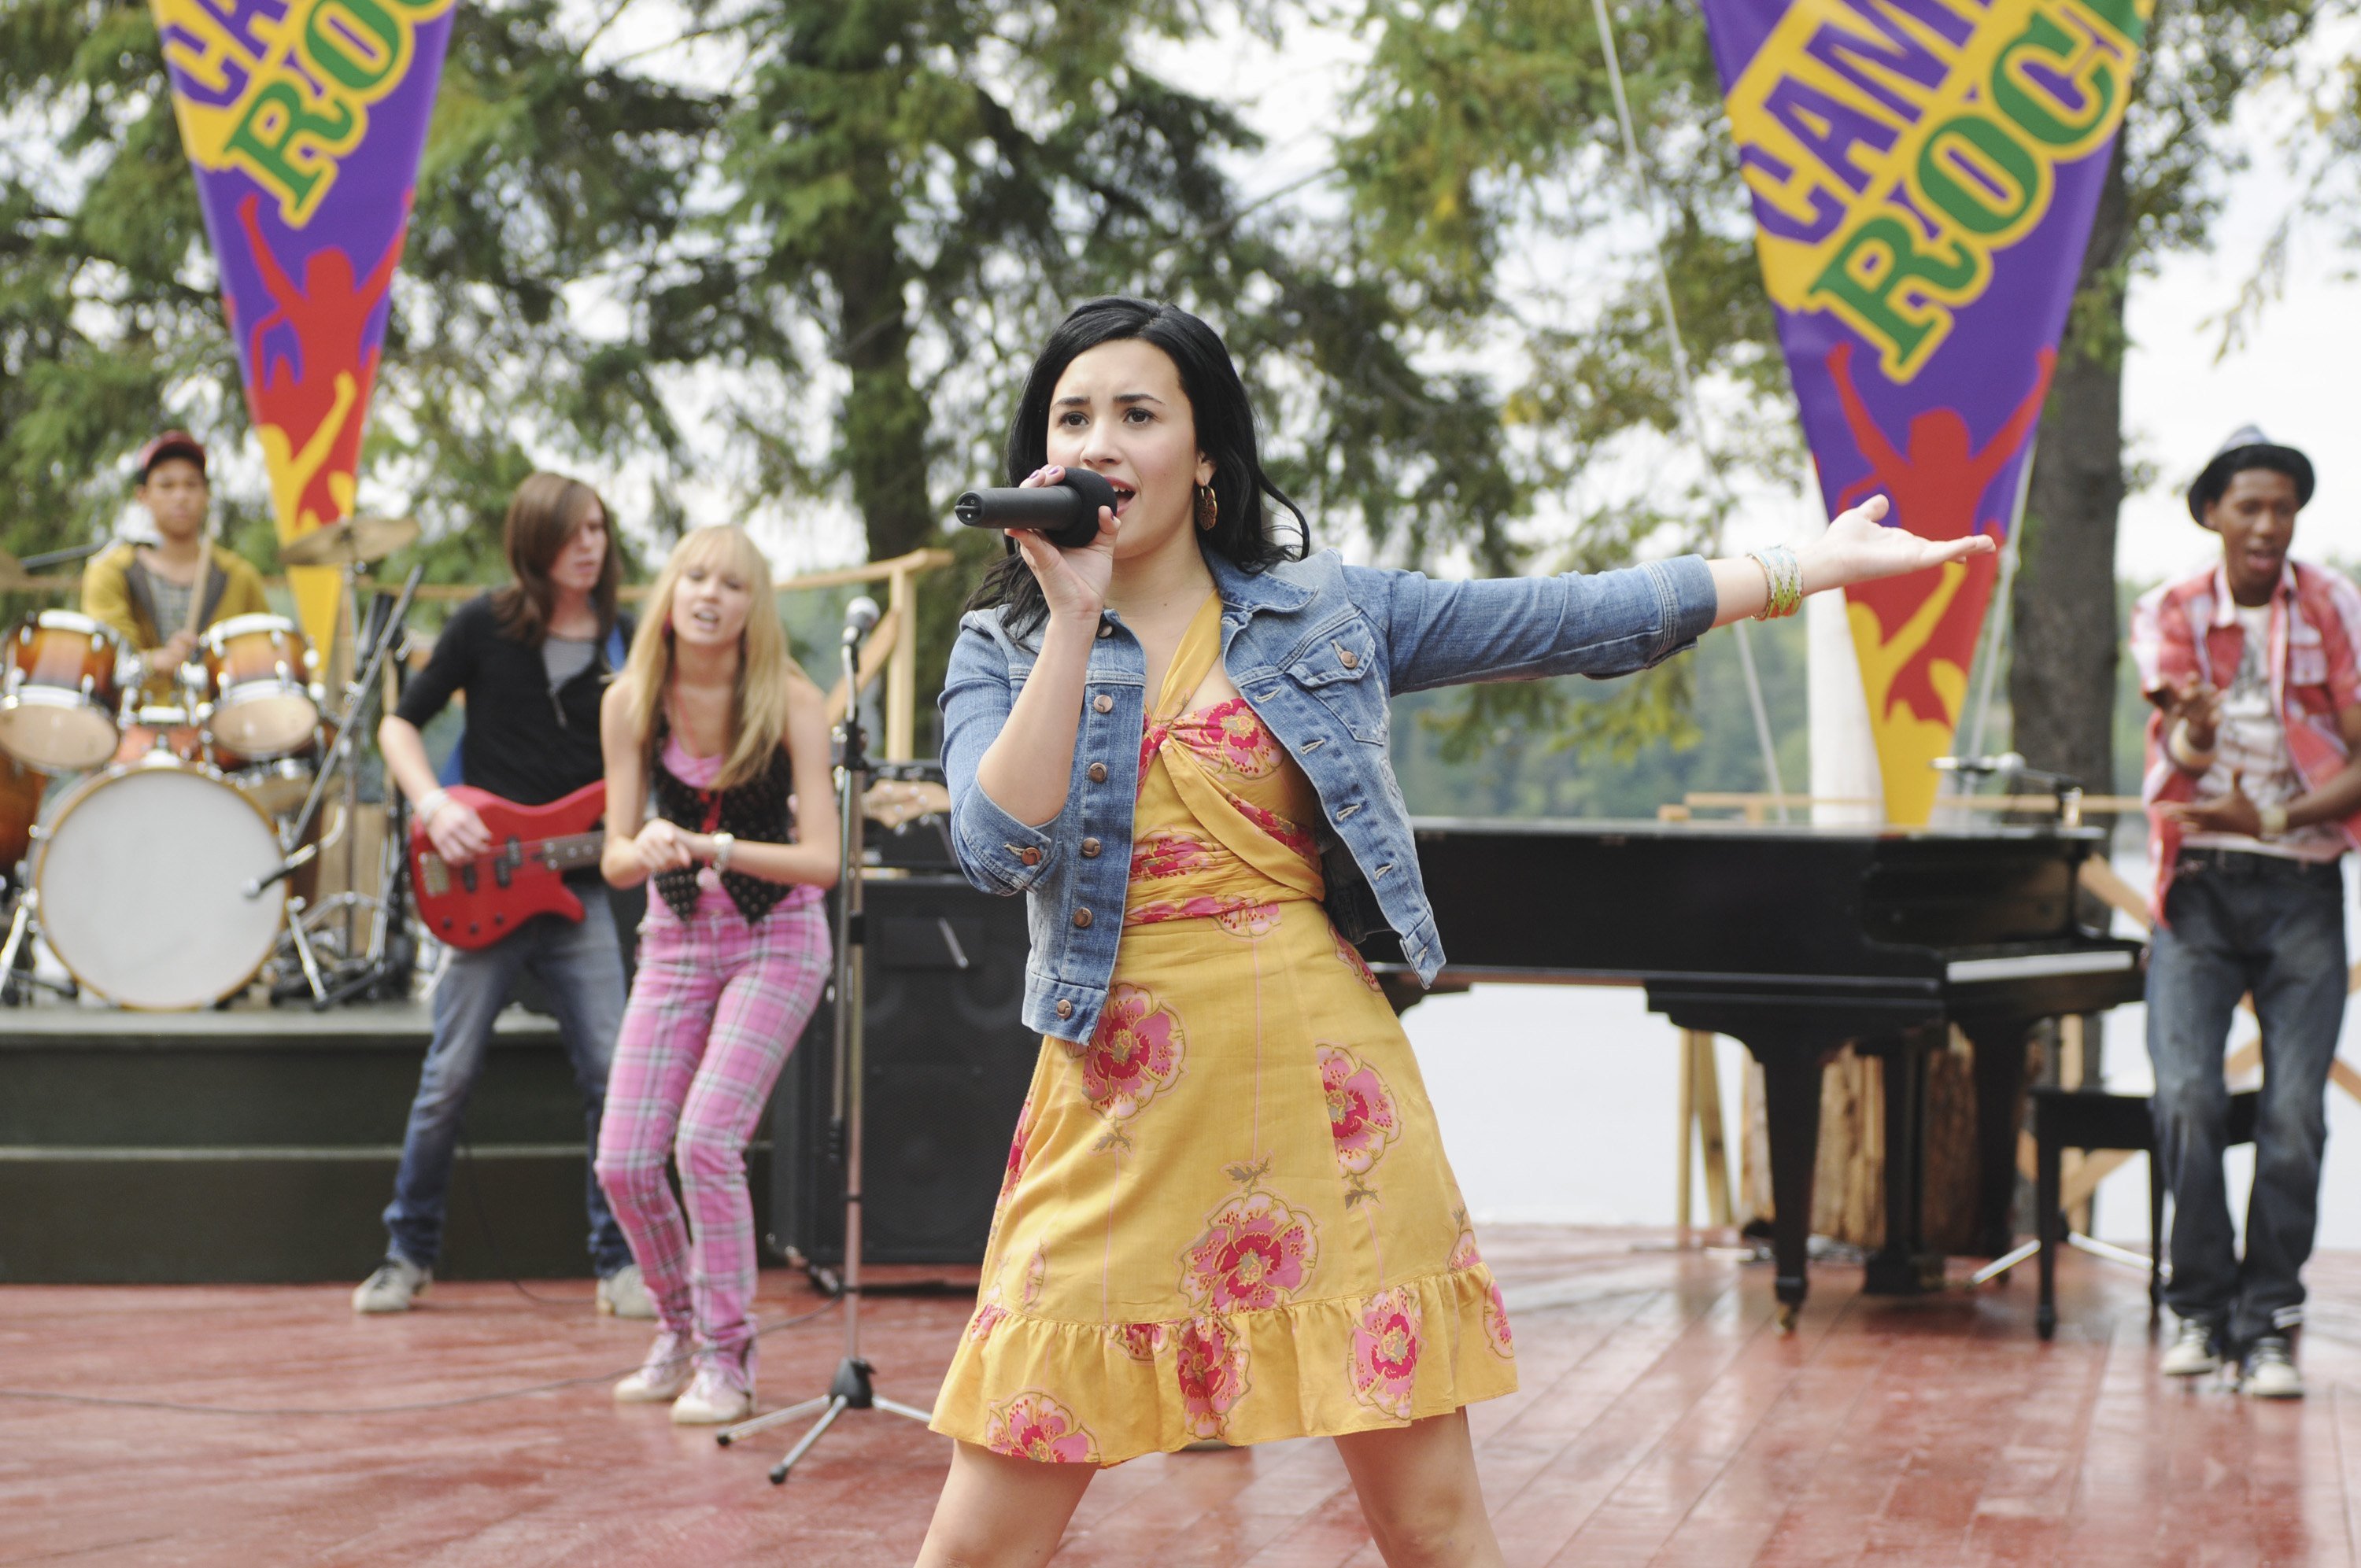 The cast of Disney Channel's 'Camp Rock 2: The Final Jam' starring Demi Lovato and the Jonas Brothers